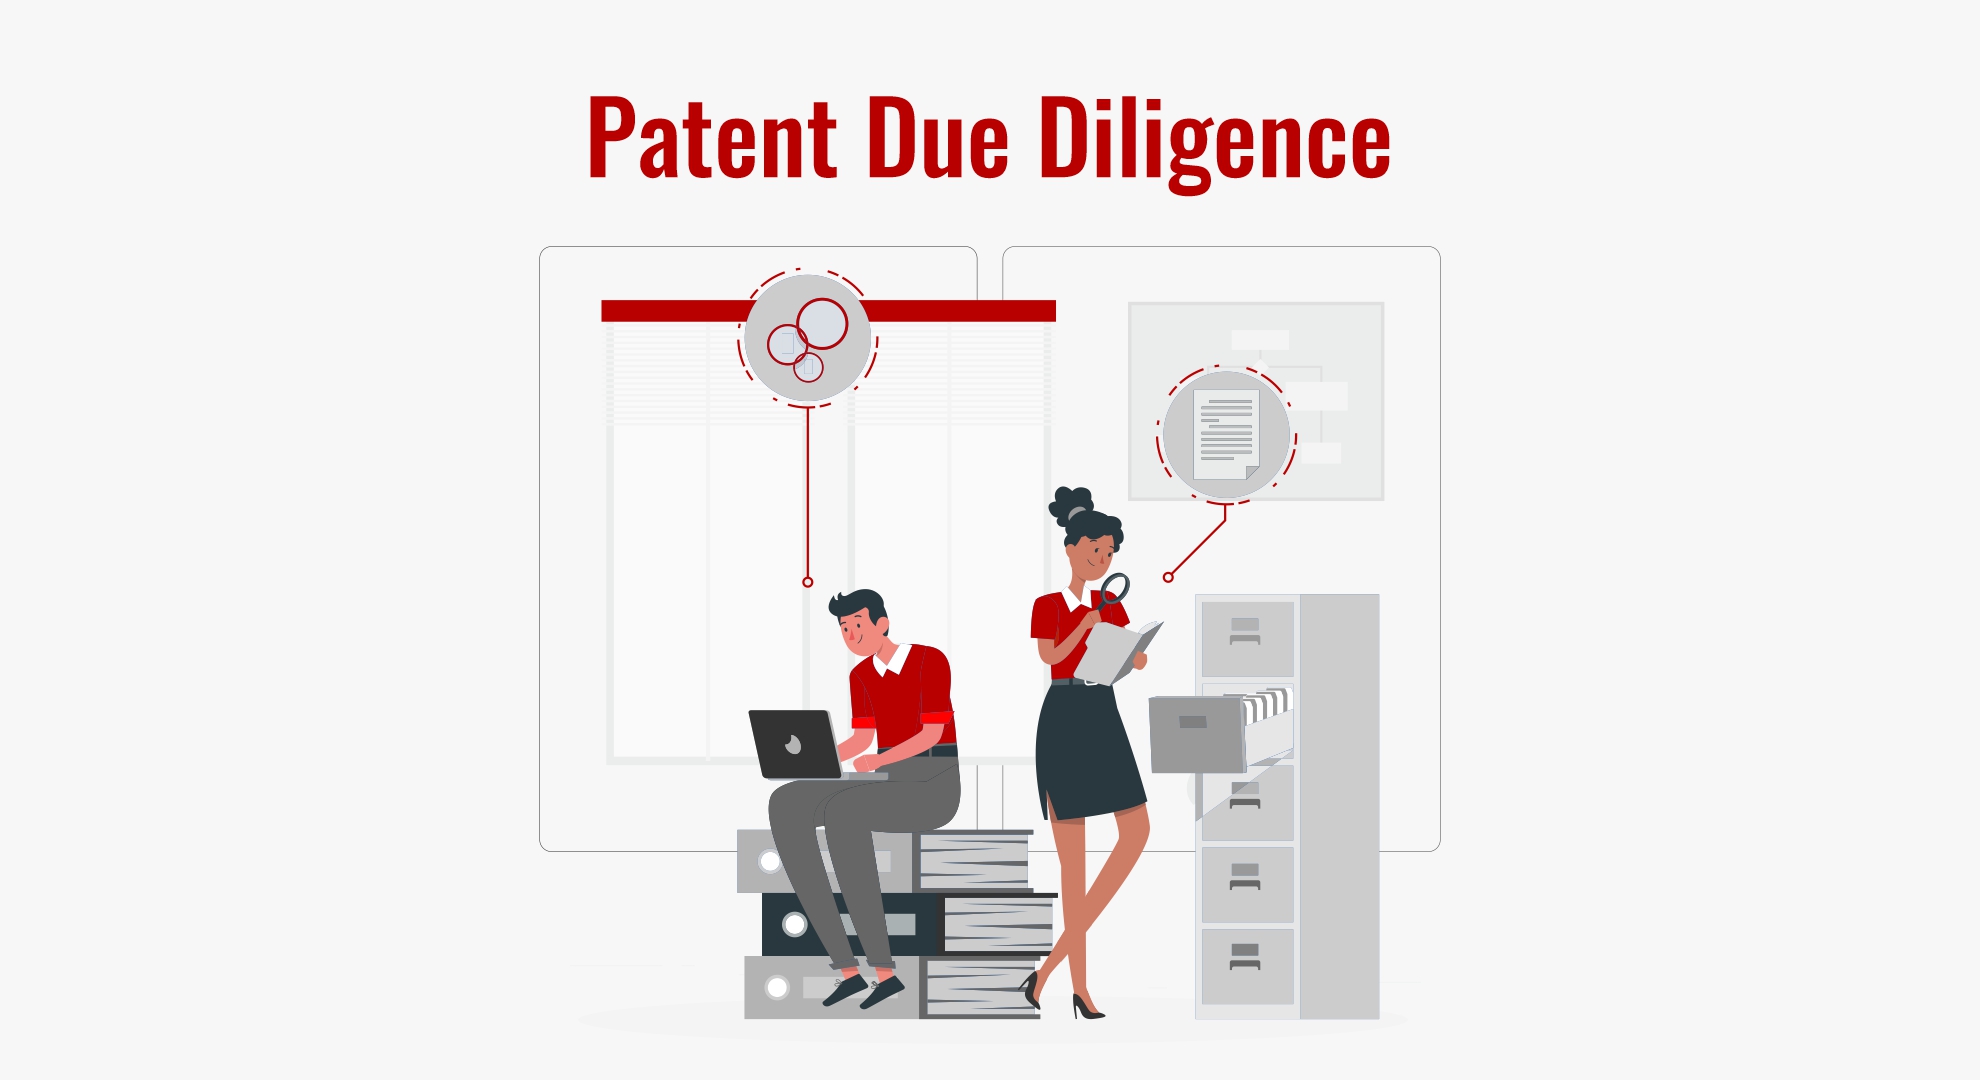 Patent Due Diligence